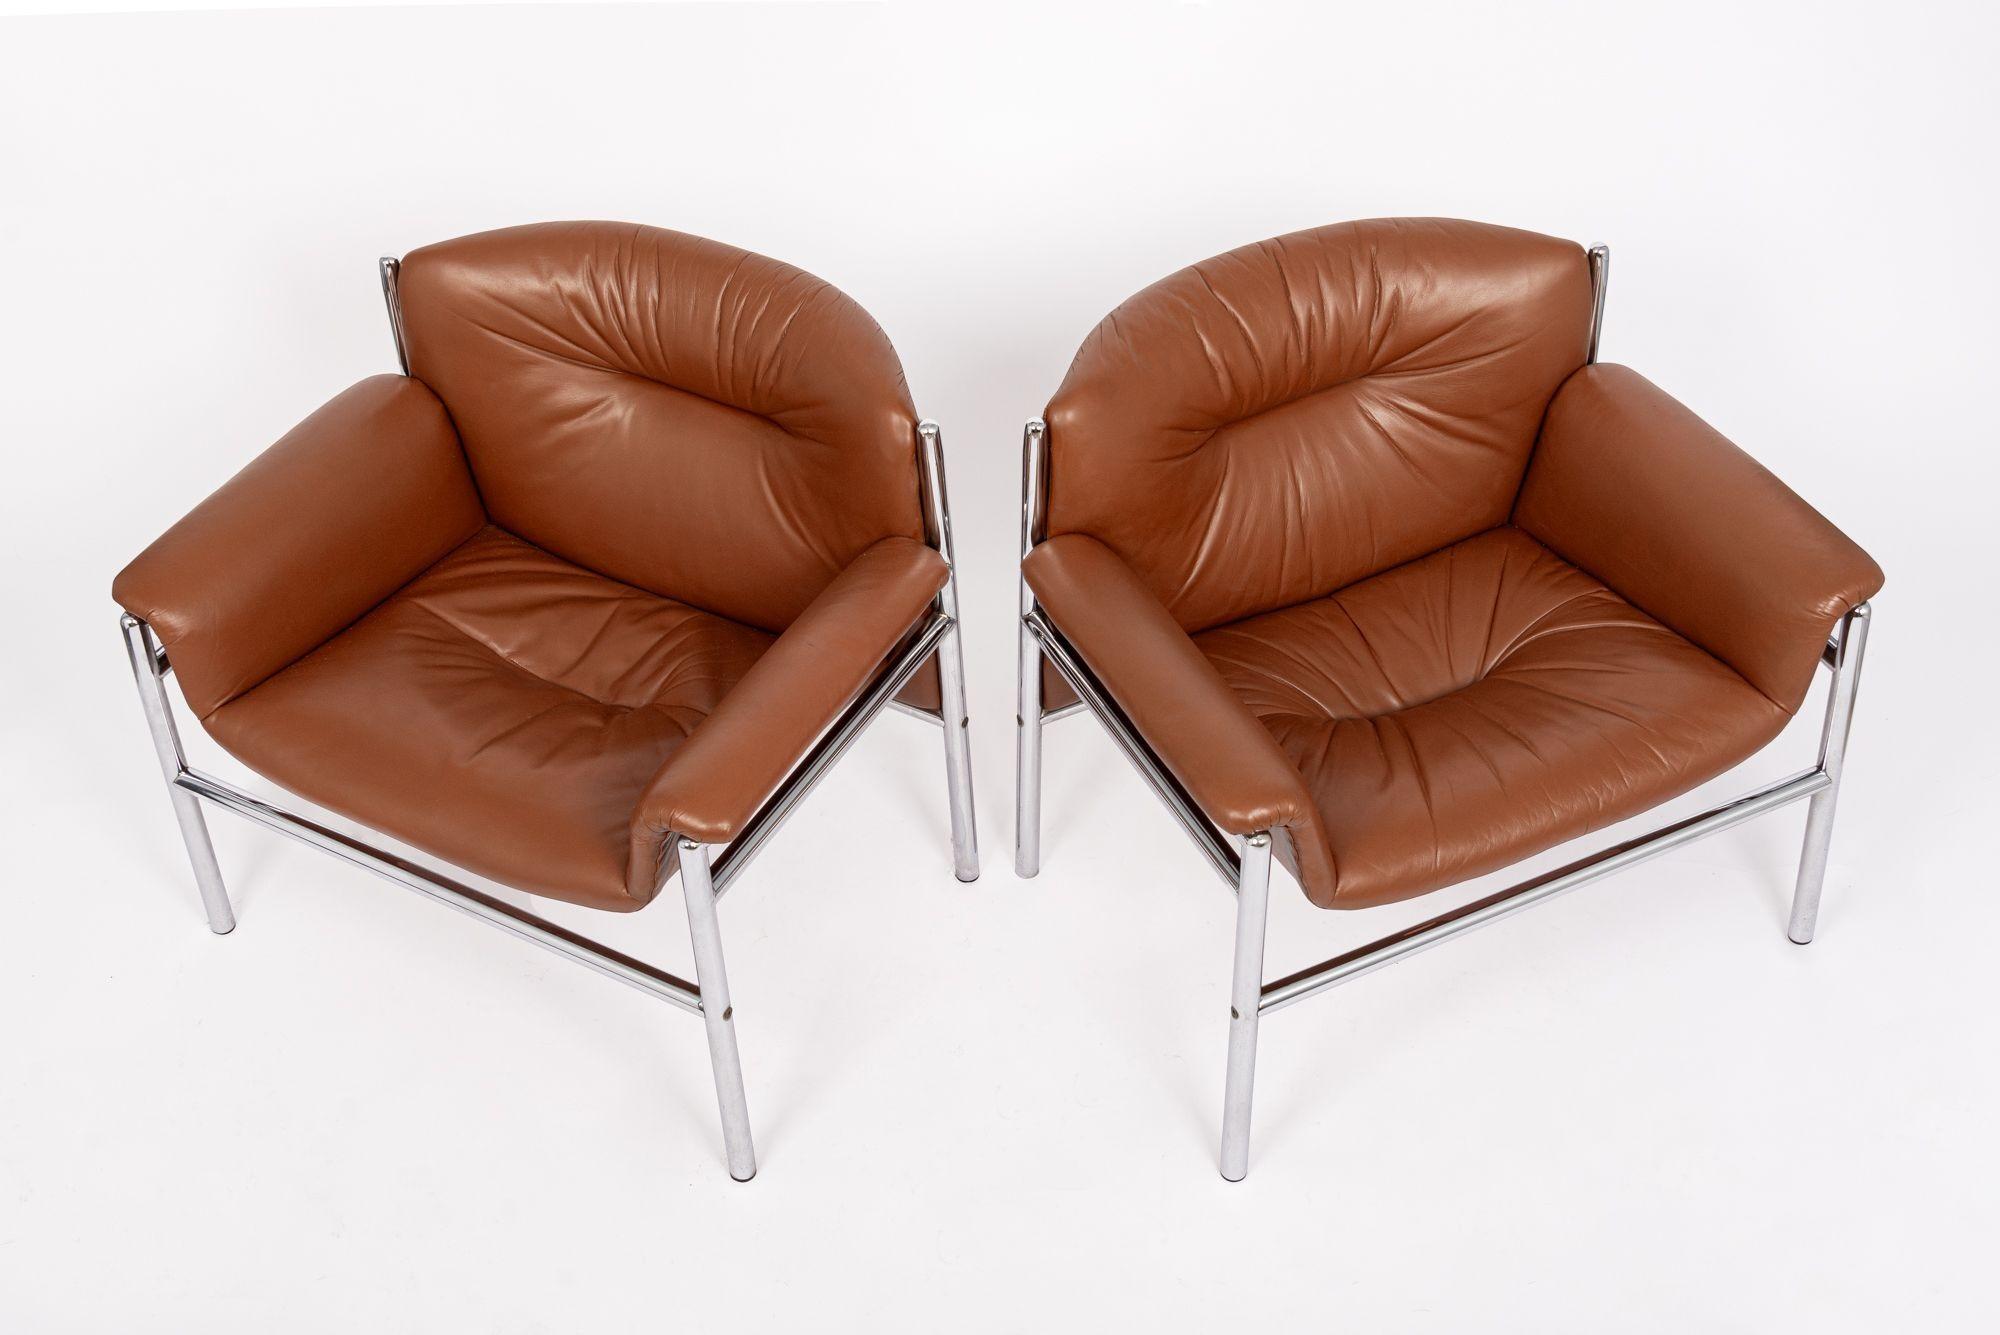 Steel Mid Century Caramel Brown Leather Lounge Chairs by Stendig 1960s For Sale